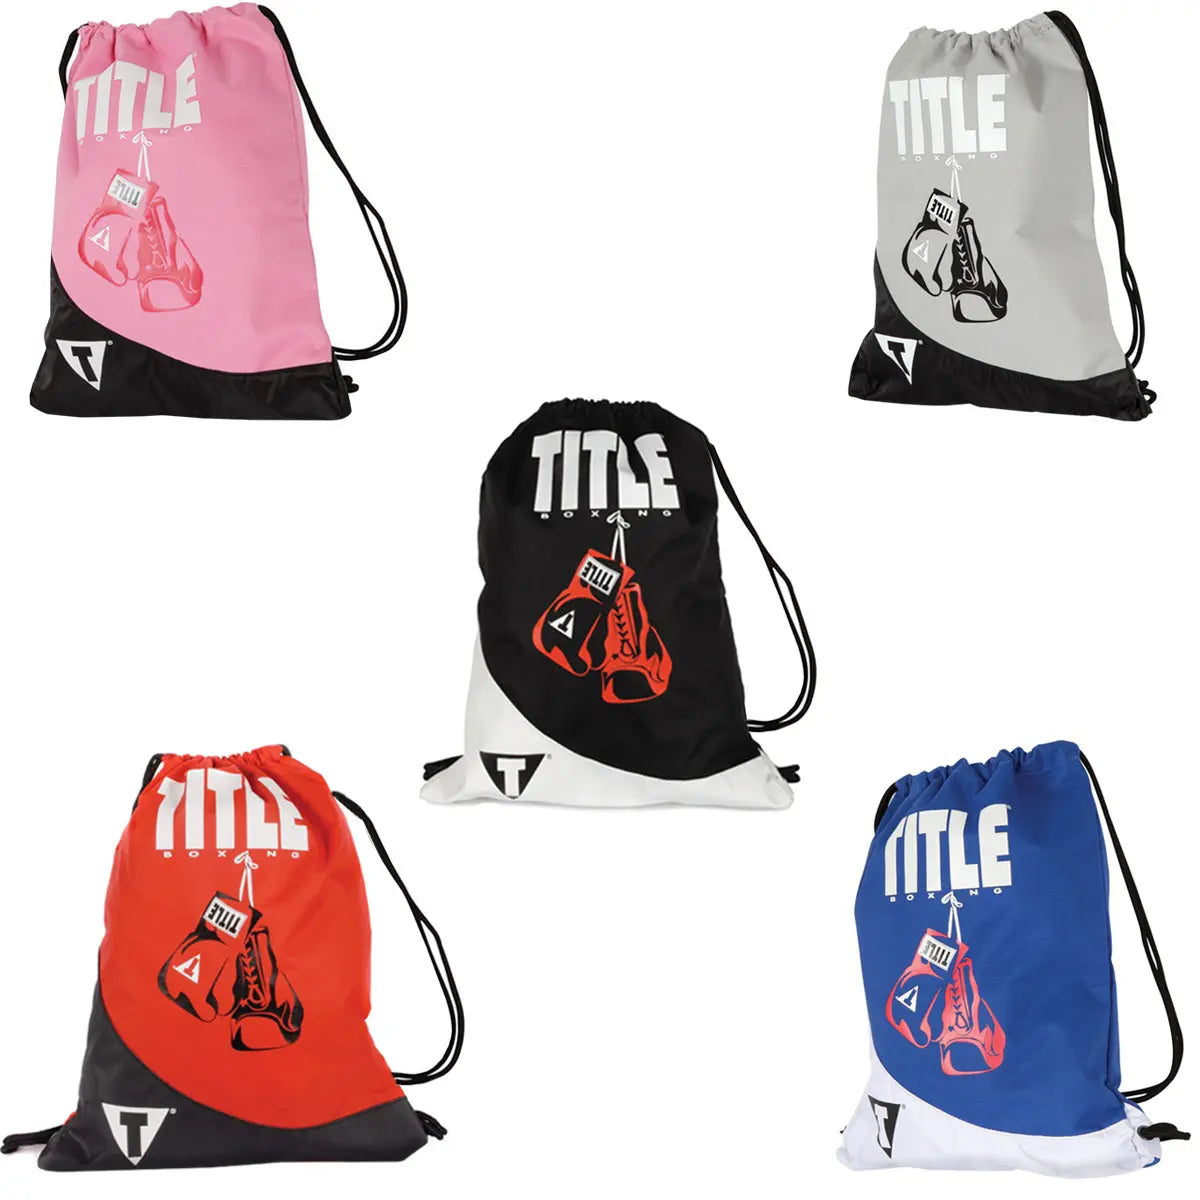 Title Boxing Gym Sack Pack Title Boxing